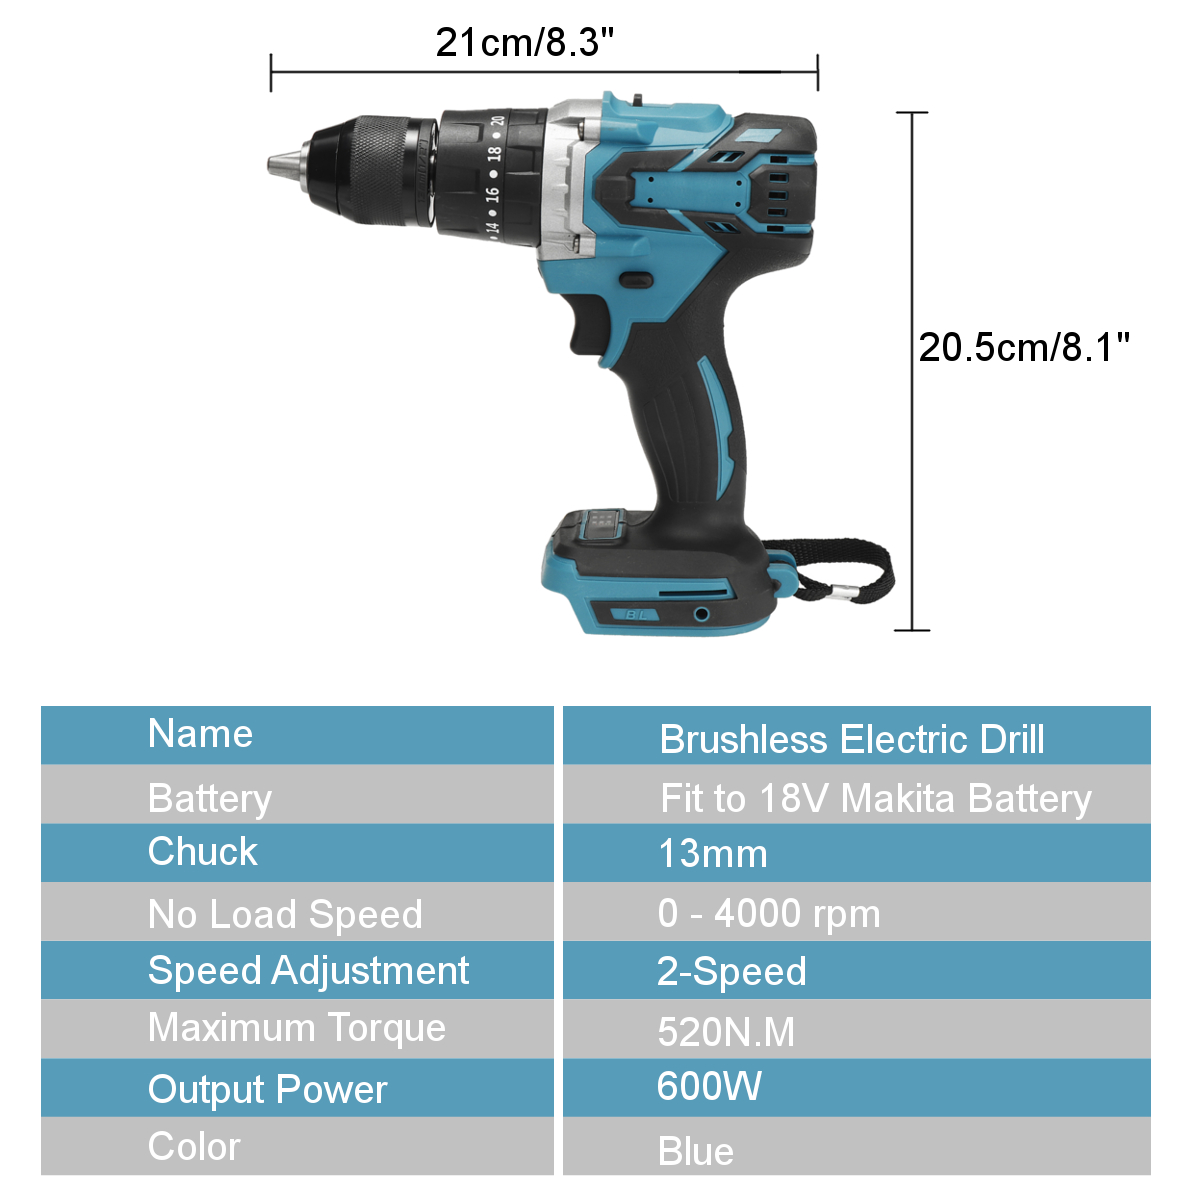 Brushless-Electric-Drill-20-Torque-520NM-Cordless-Screwdriver-13mm-Chuck-Power-Drill-for-Makita-18V--1801609-14